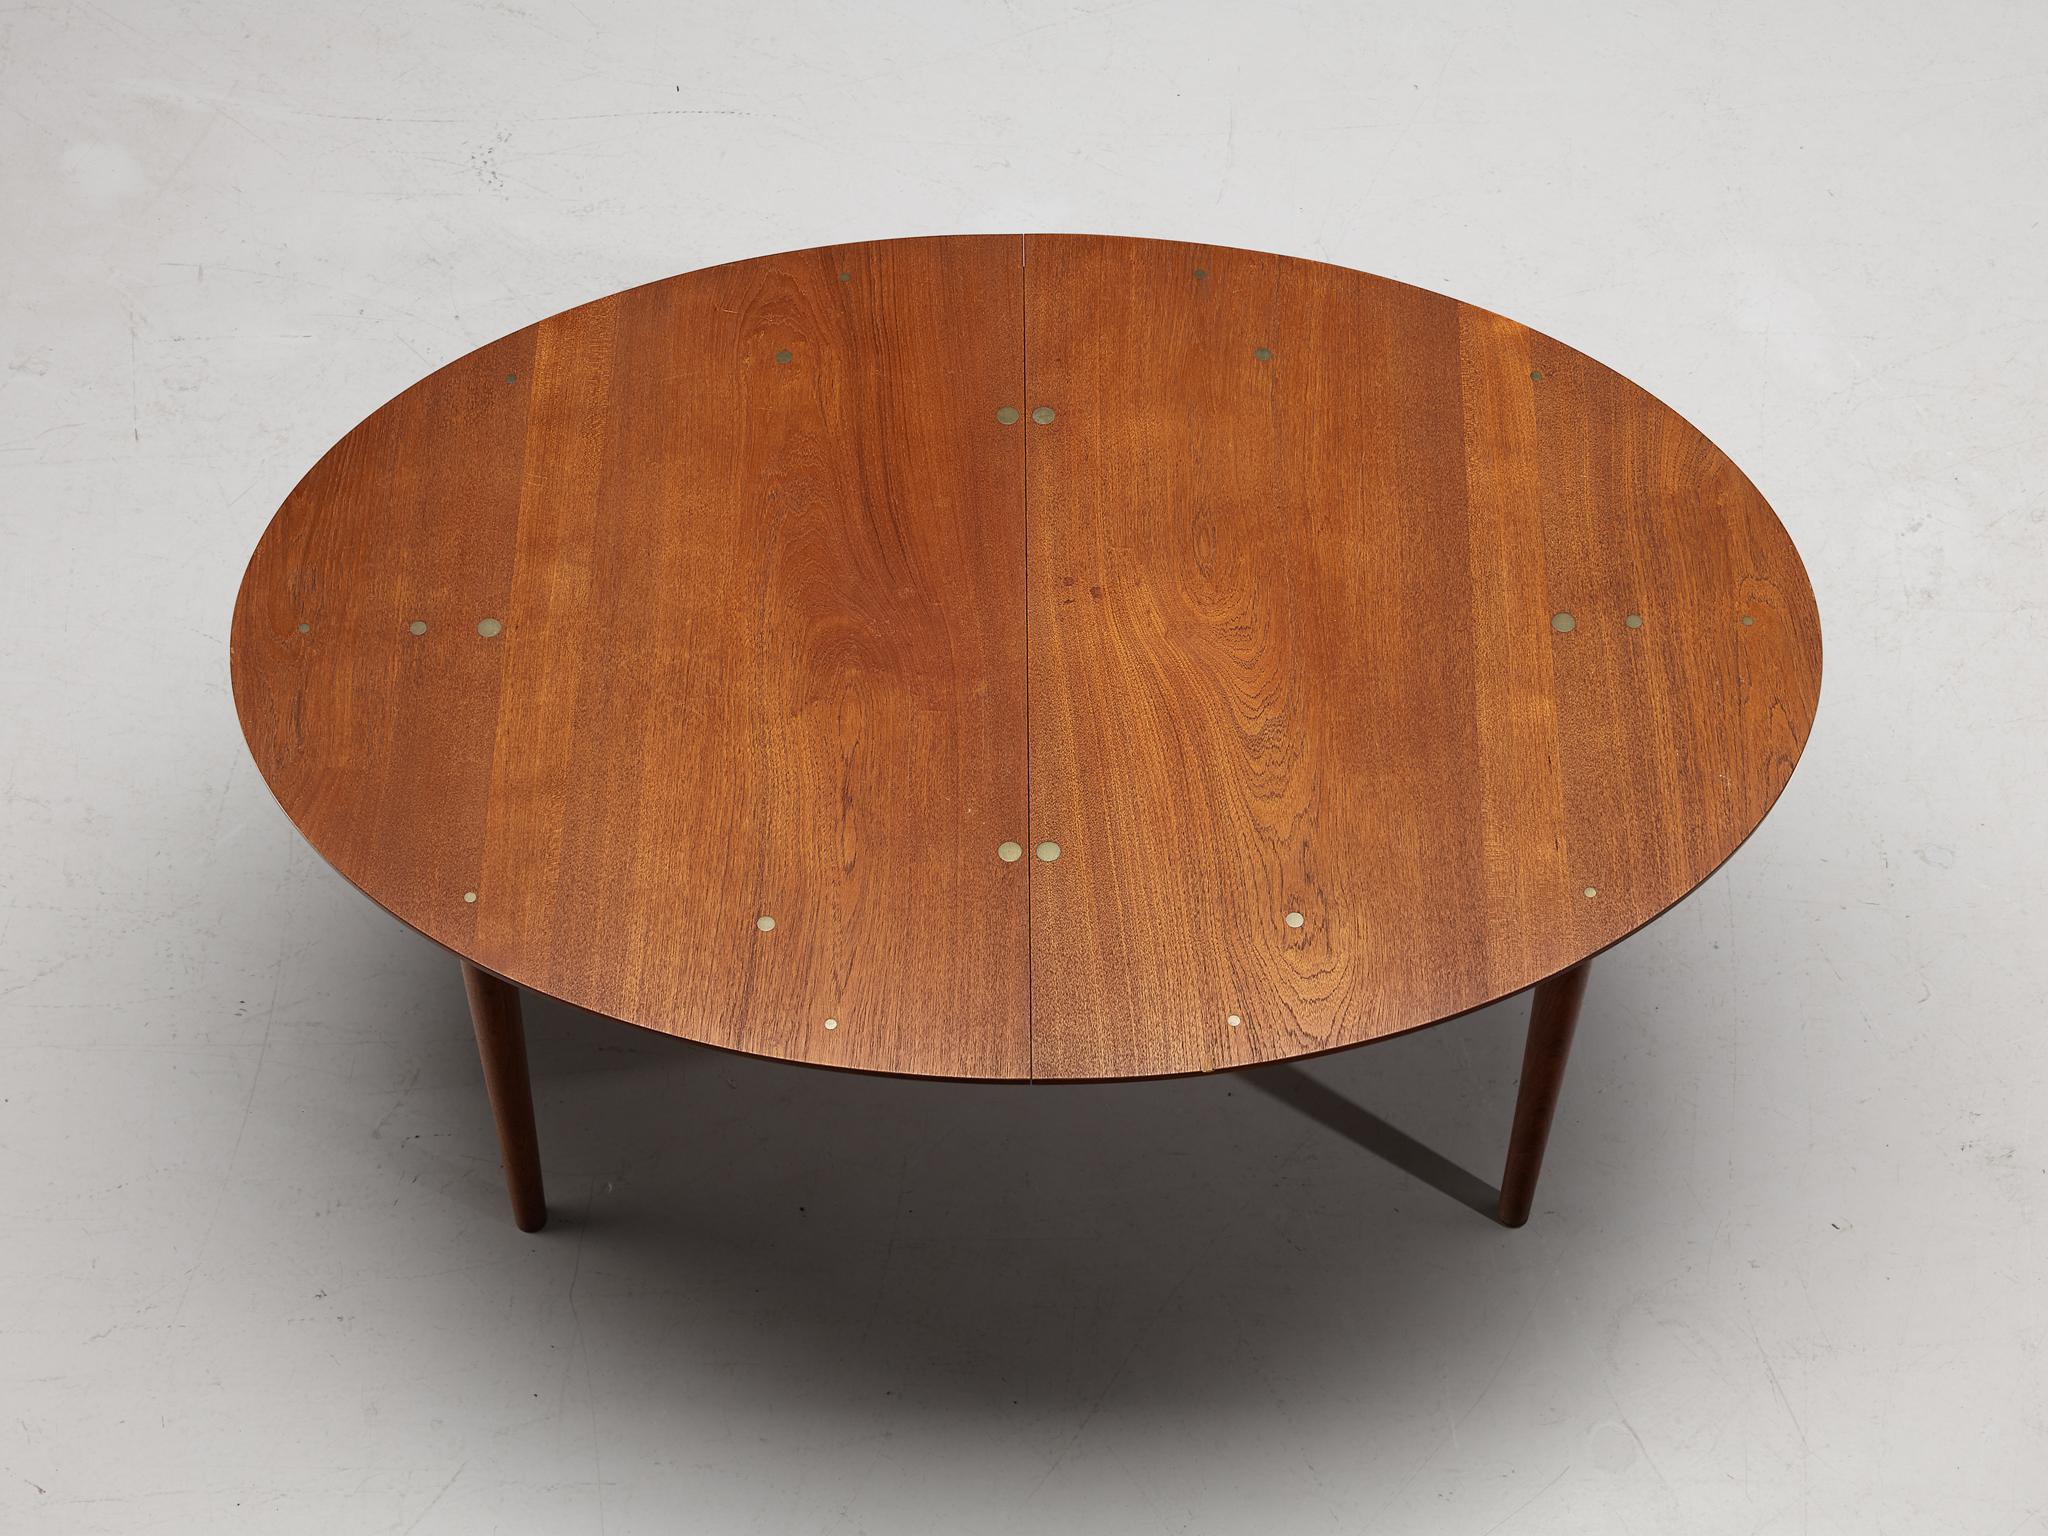 Finn Juhl for Niels Vodder Dining Table ‘Judas’ in Teak and Silver Inlay 2